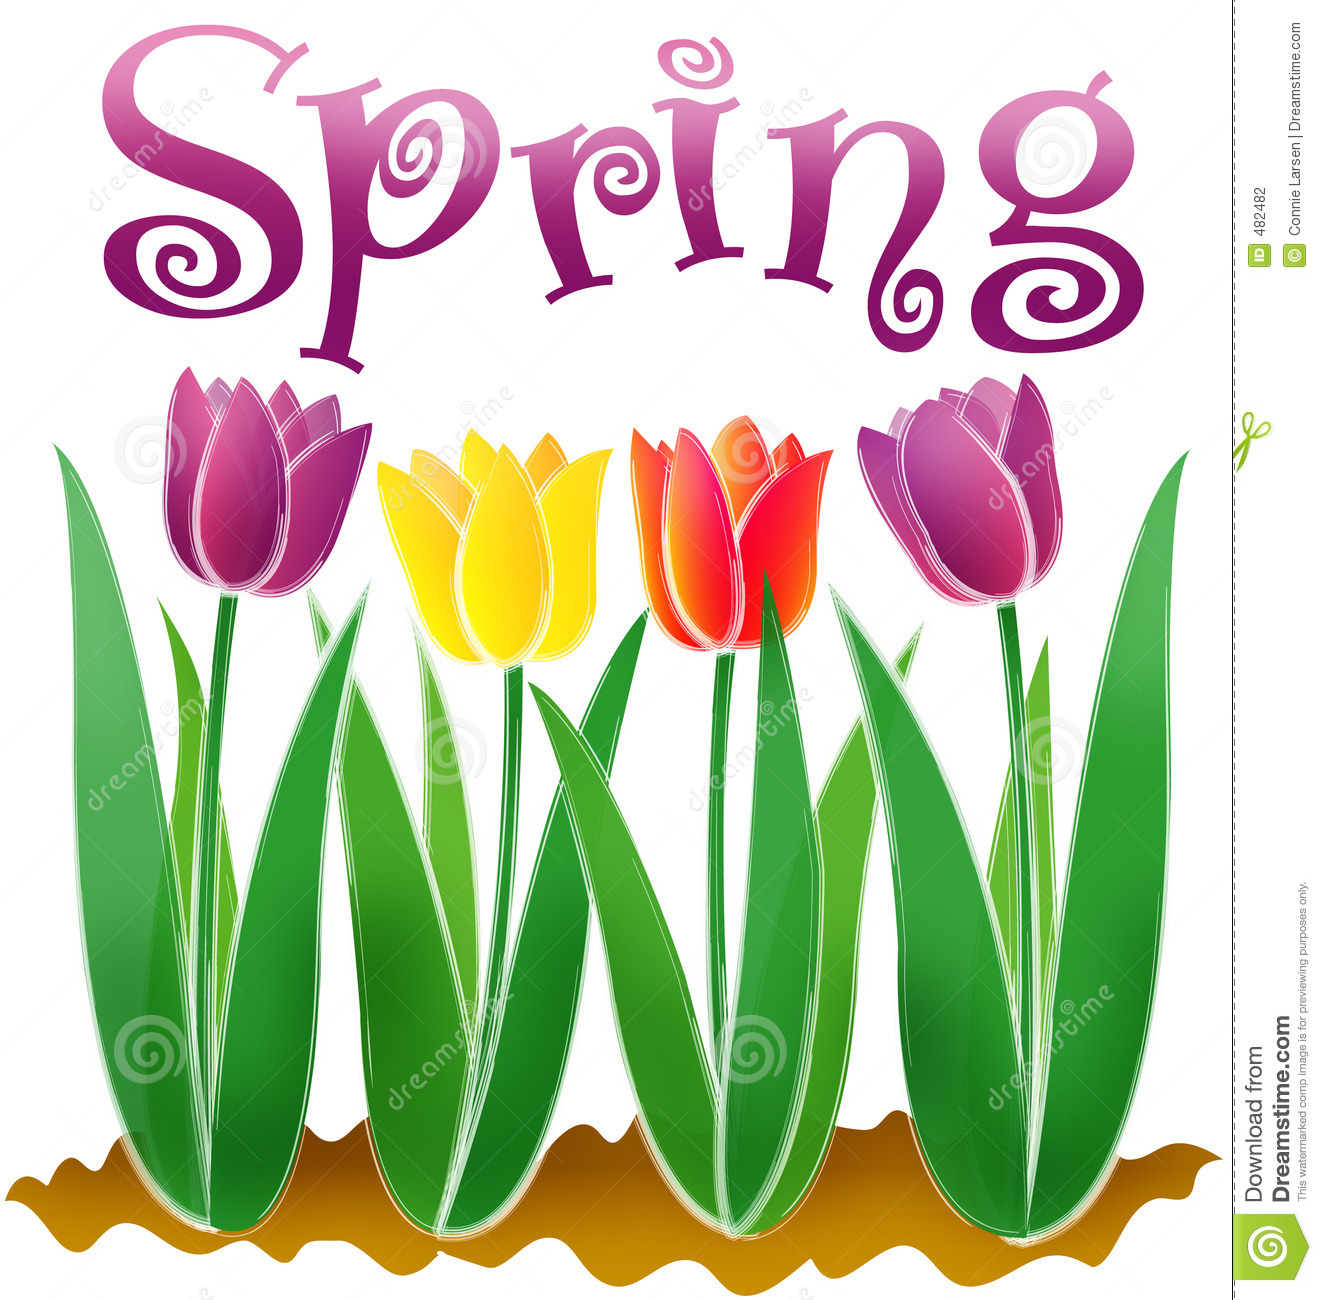 Free clip art of spring pictures